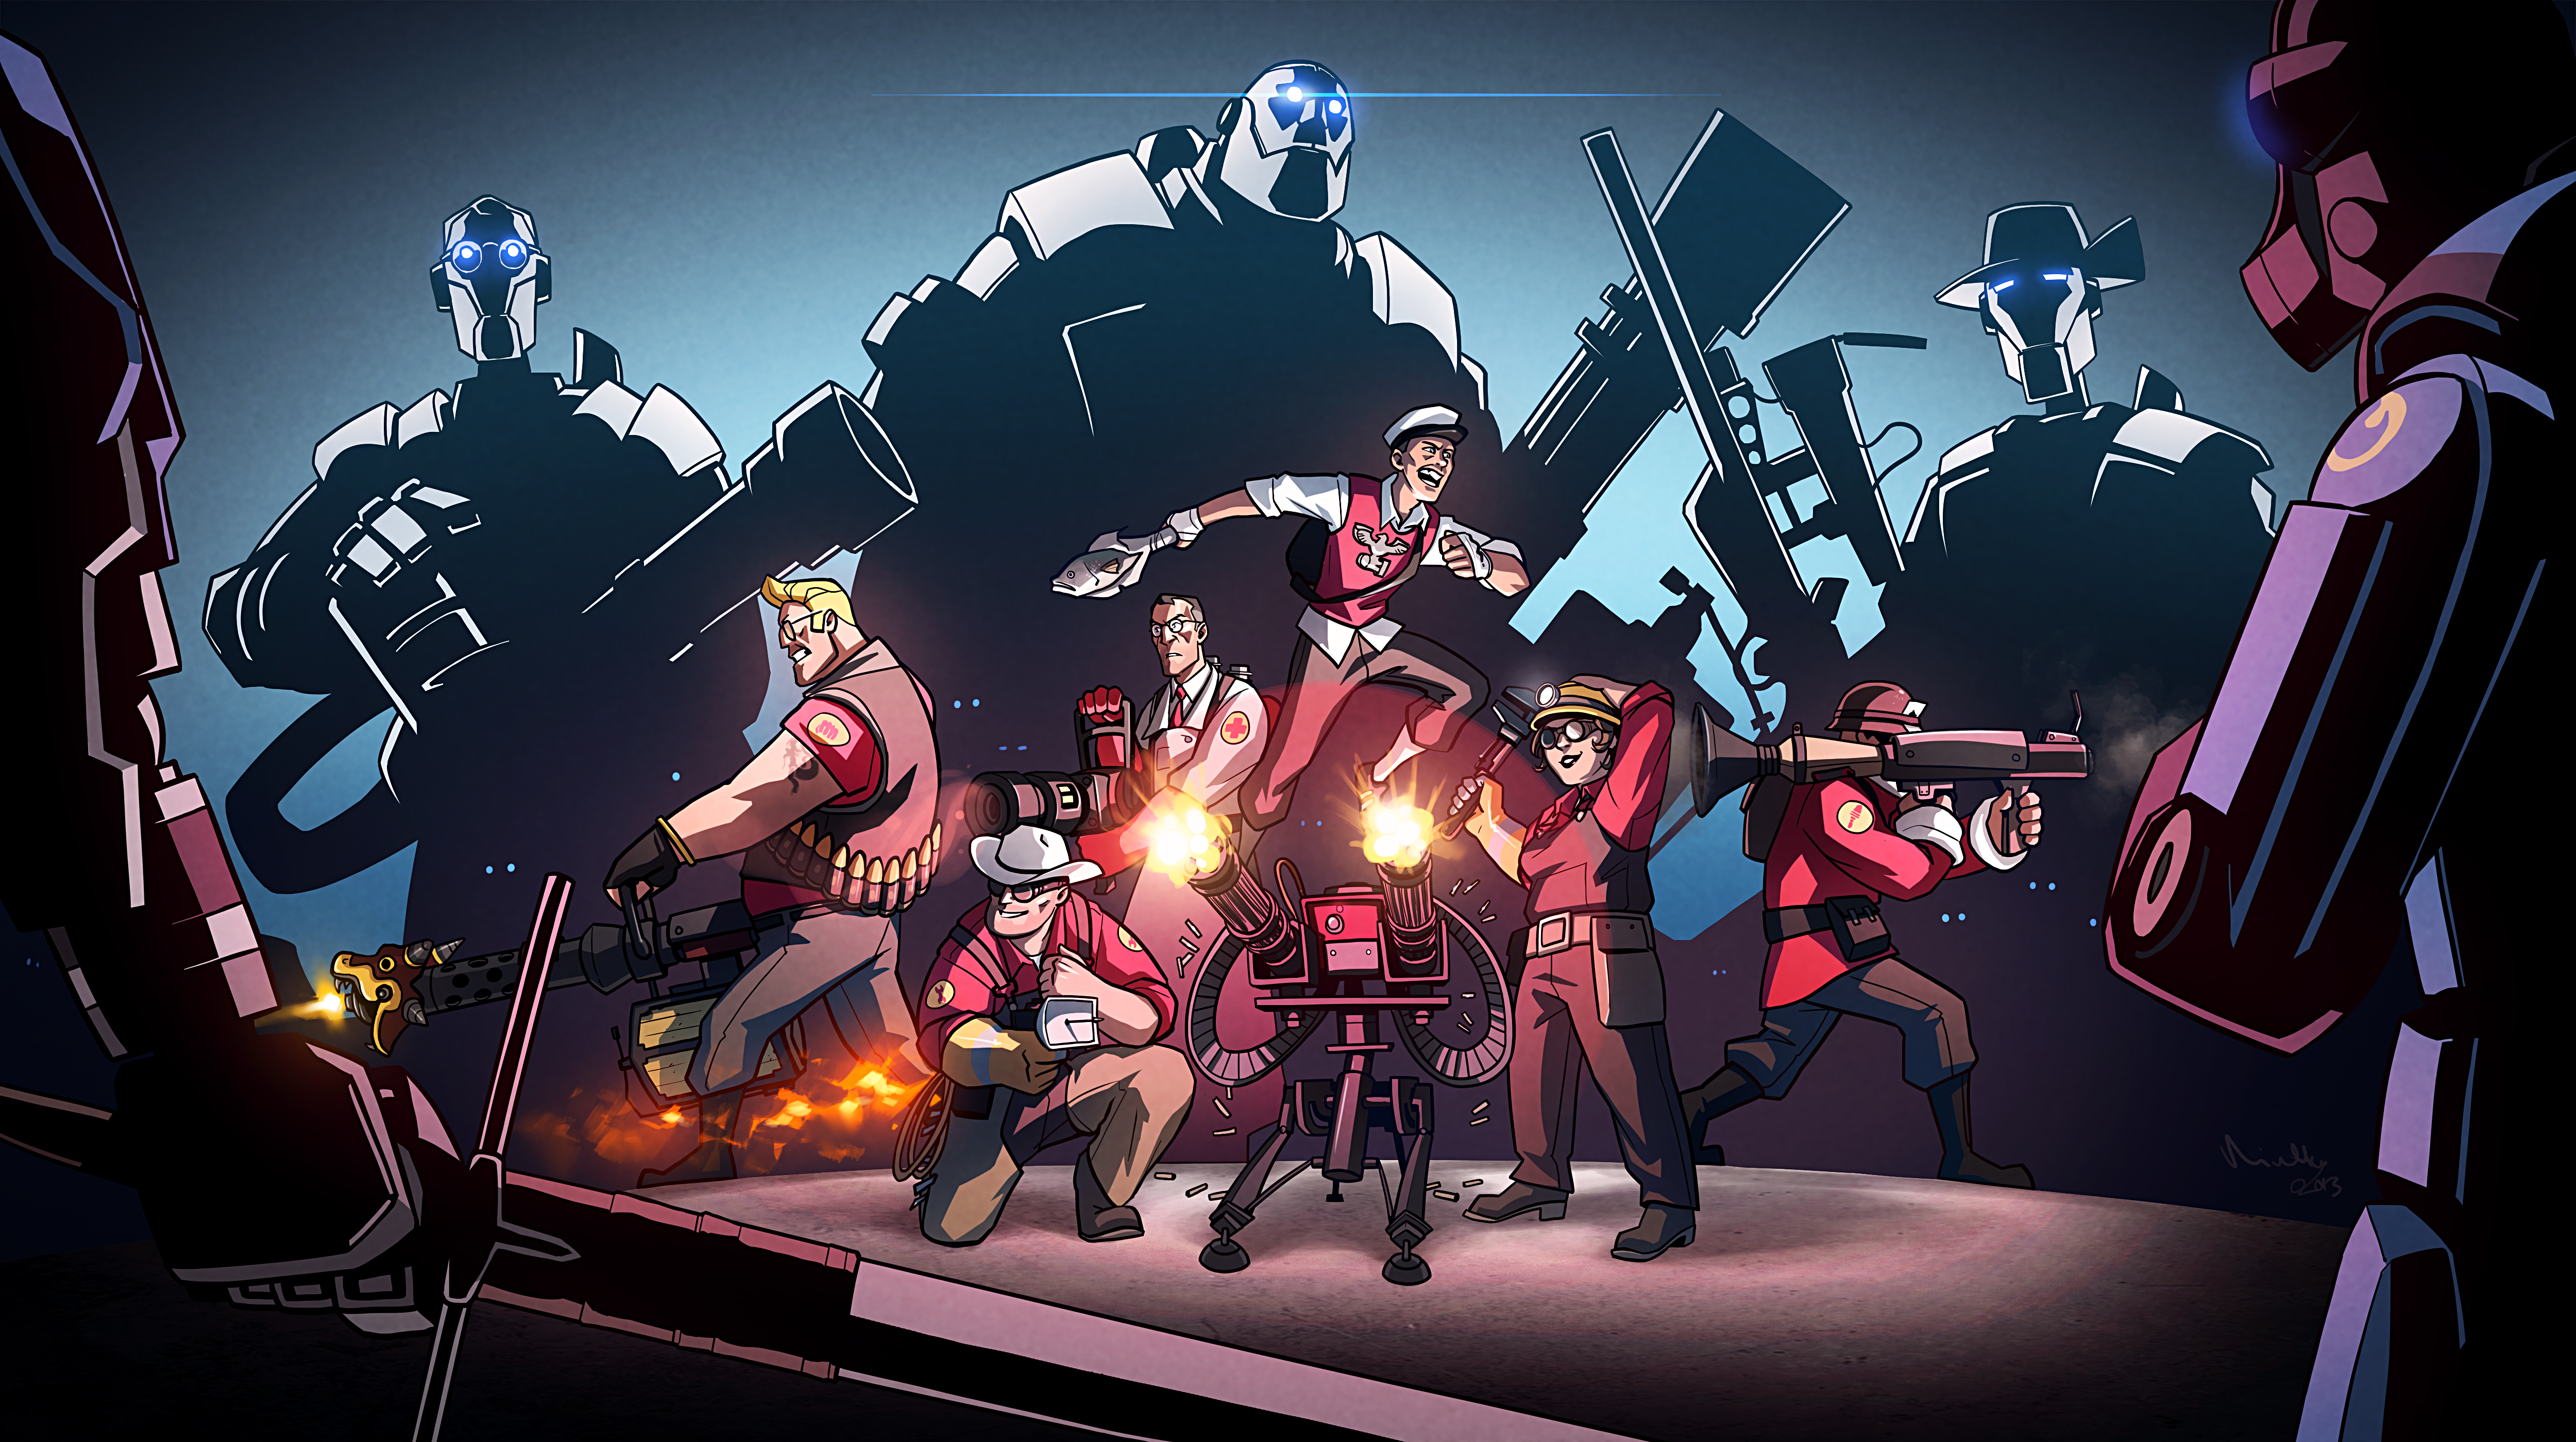 mann_vs_machine_aka_our_team_fortress_2_group_by_nielspeterdejong-d5t9wi2.png